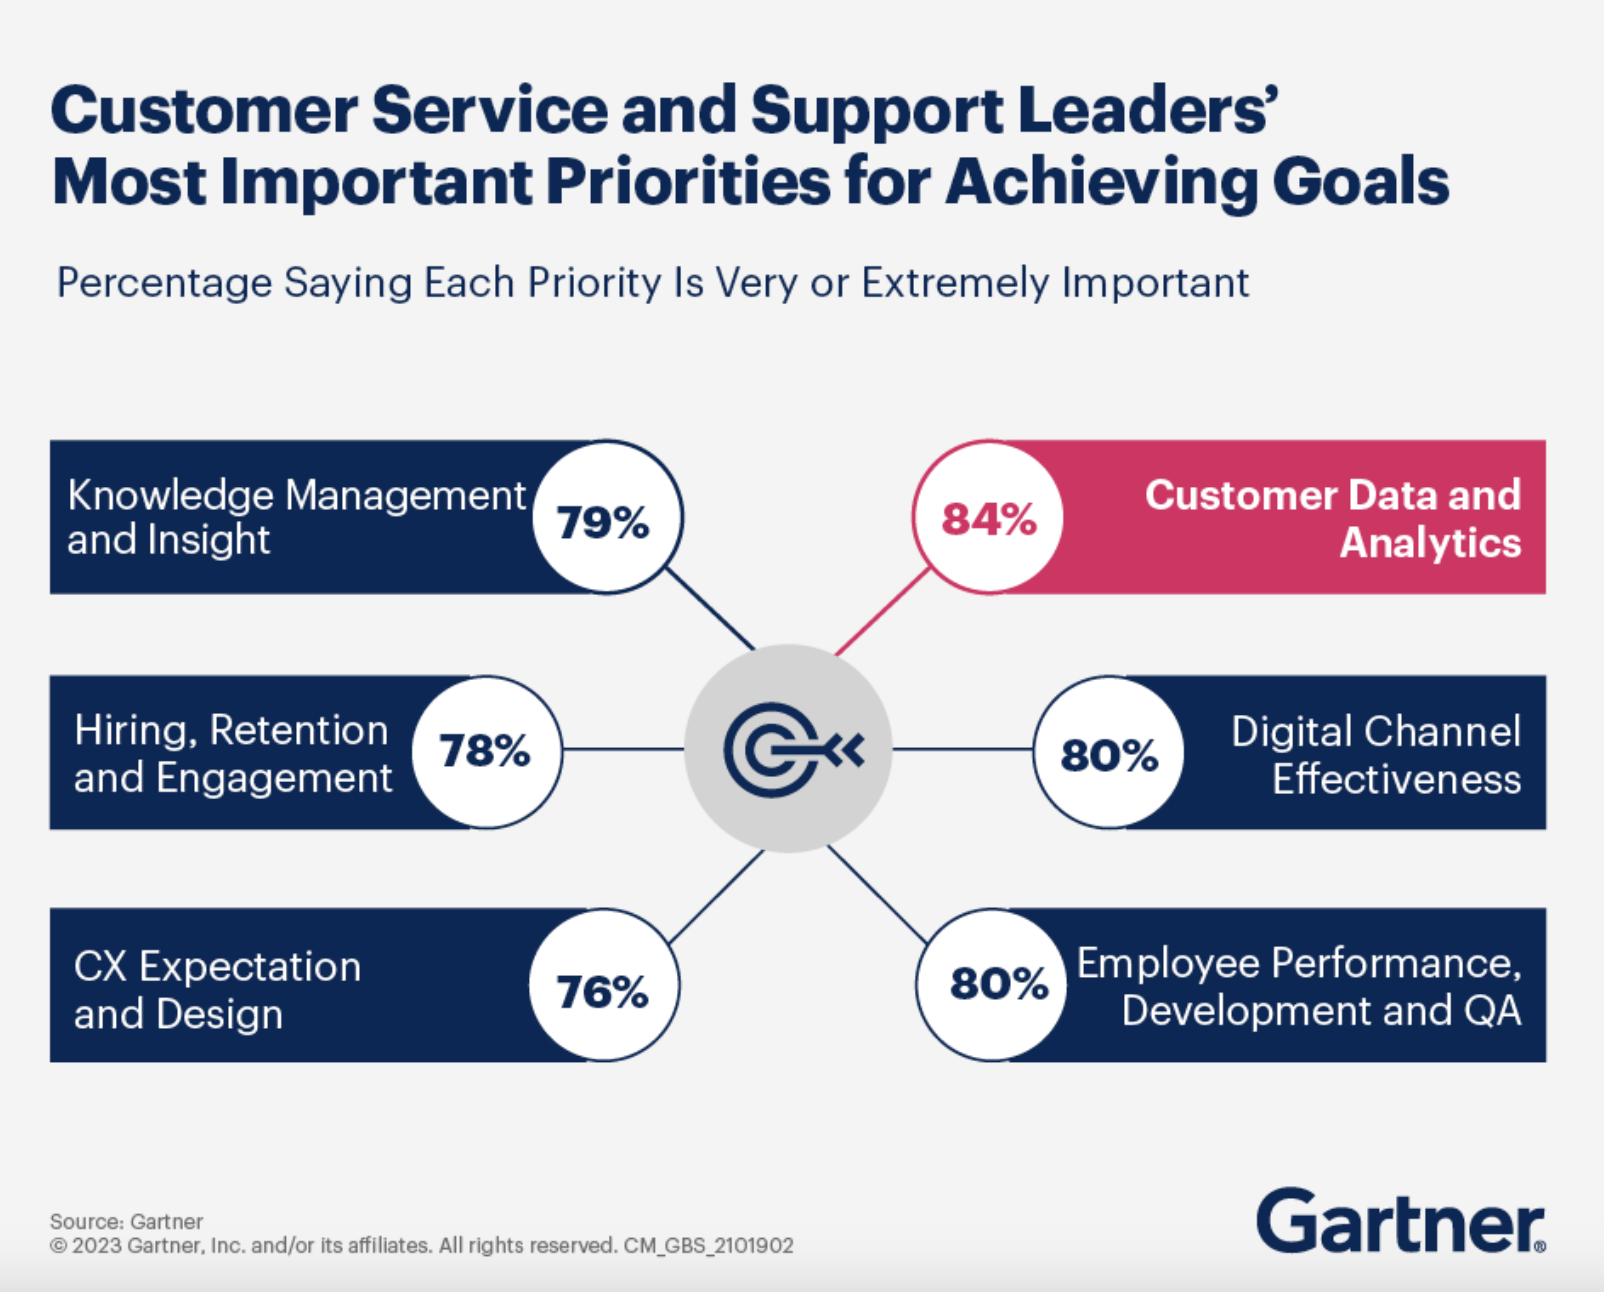 A screenshot showing customer service and support leaders' most important priorities for achieving goals